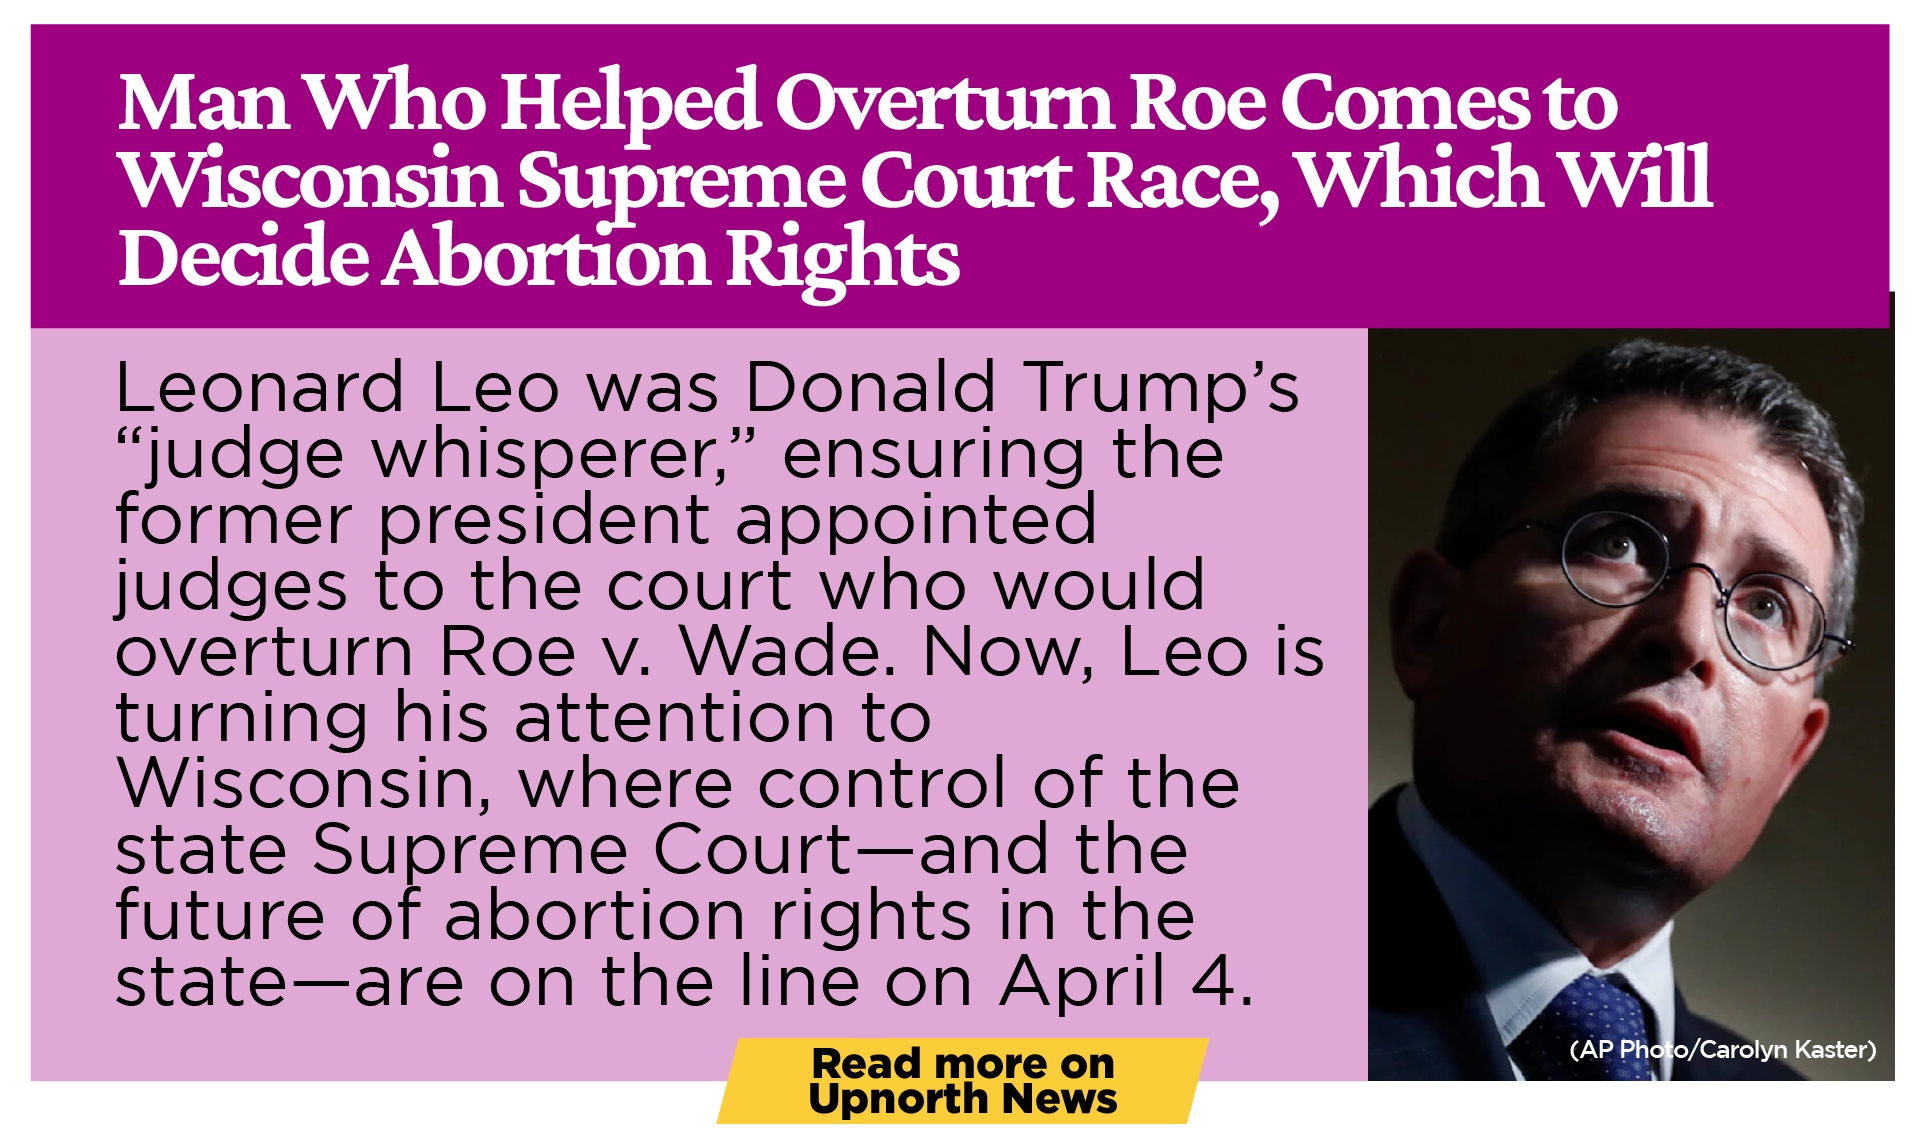 Man Who Helped Overturn Roe Comes to Wisconsin Supreme Court Race, Which Will Decide Abortion Rights Leonard Leo was Donald Trump’s “judge whisperer,” ensuring the former president appointed judges to the court who would overturn Roe v. Wade. Now, Leo is turning his attention to Wisconsin, where control of the state Supreme Court—and the future of abortion rights in the state—are on the line on April 4. 